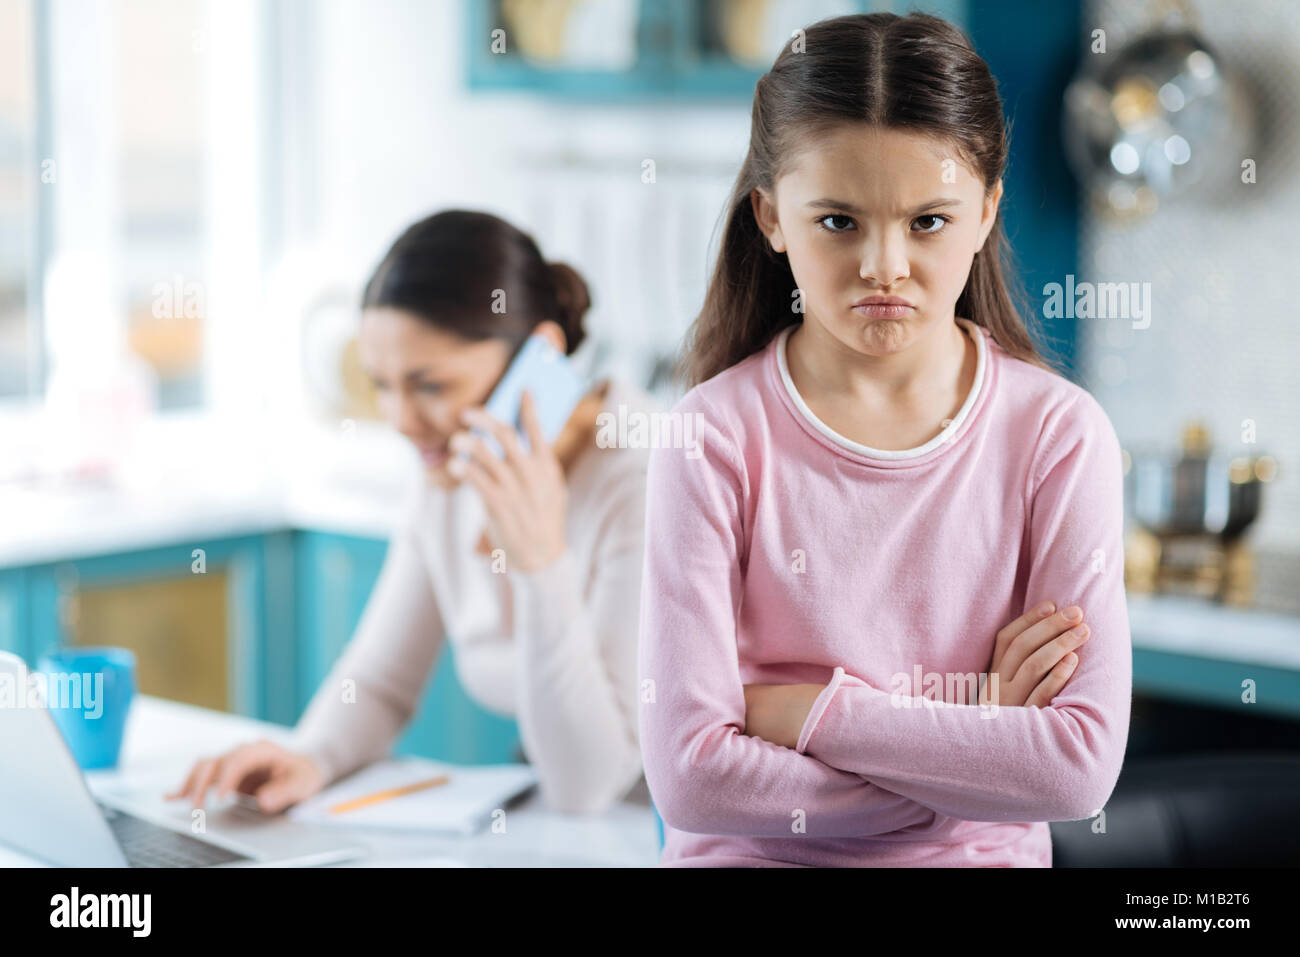 Resentful little girl and her mom working Stock Photo